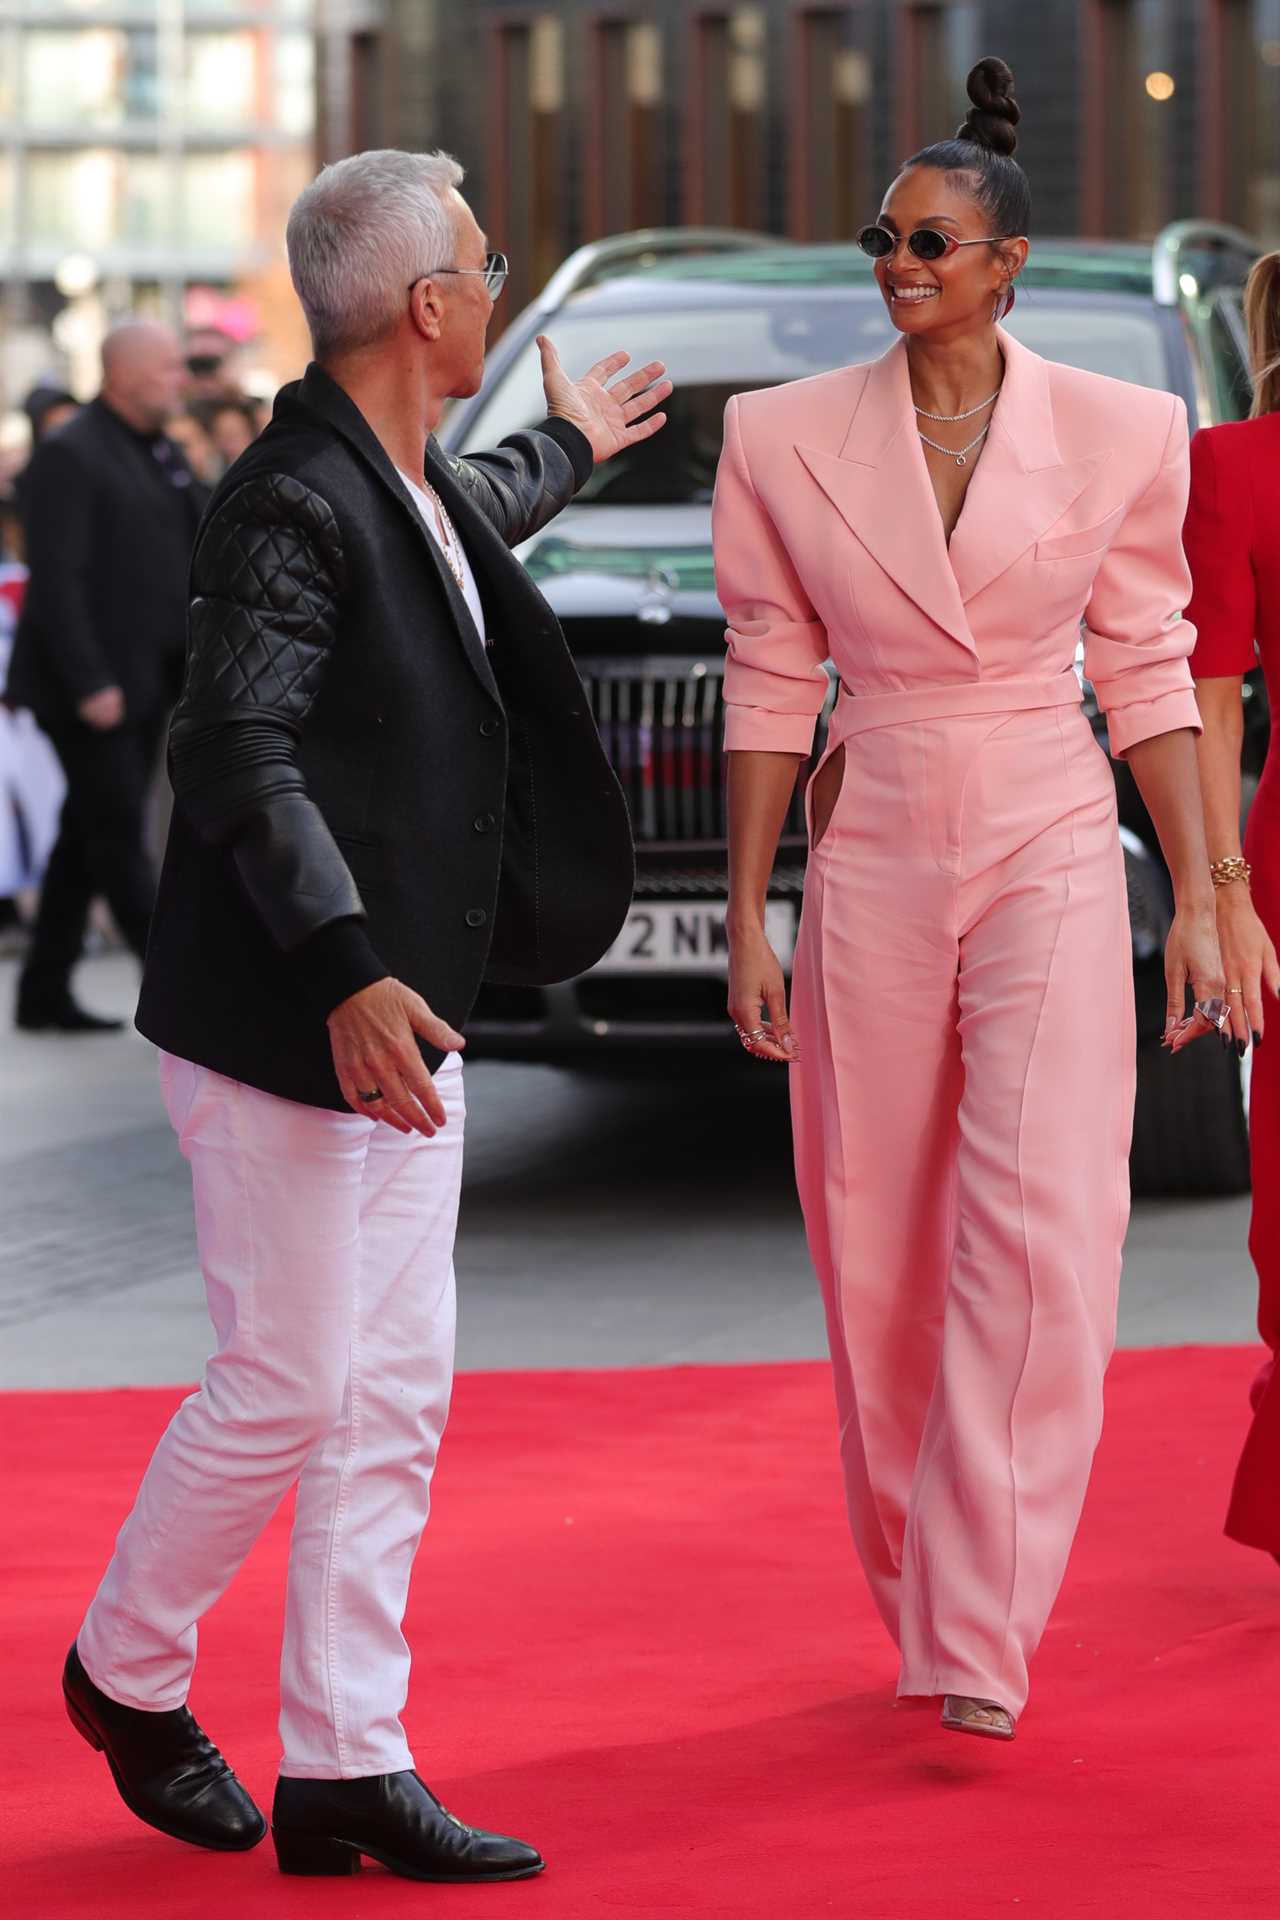 Britain’s Got Talent’s Alesha Dixon throws major shade at ‘exhausting’ Bruno Tonioli after breaking show rules